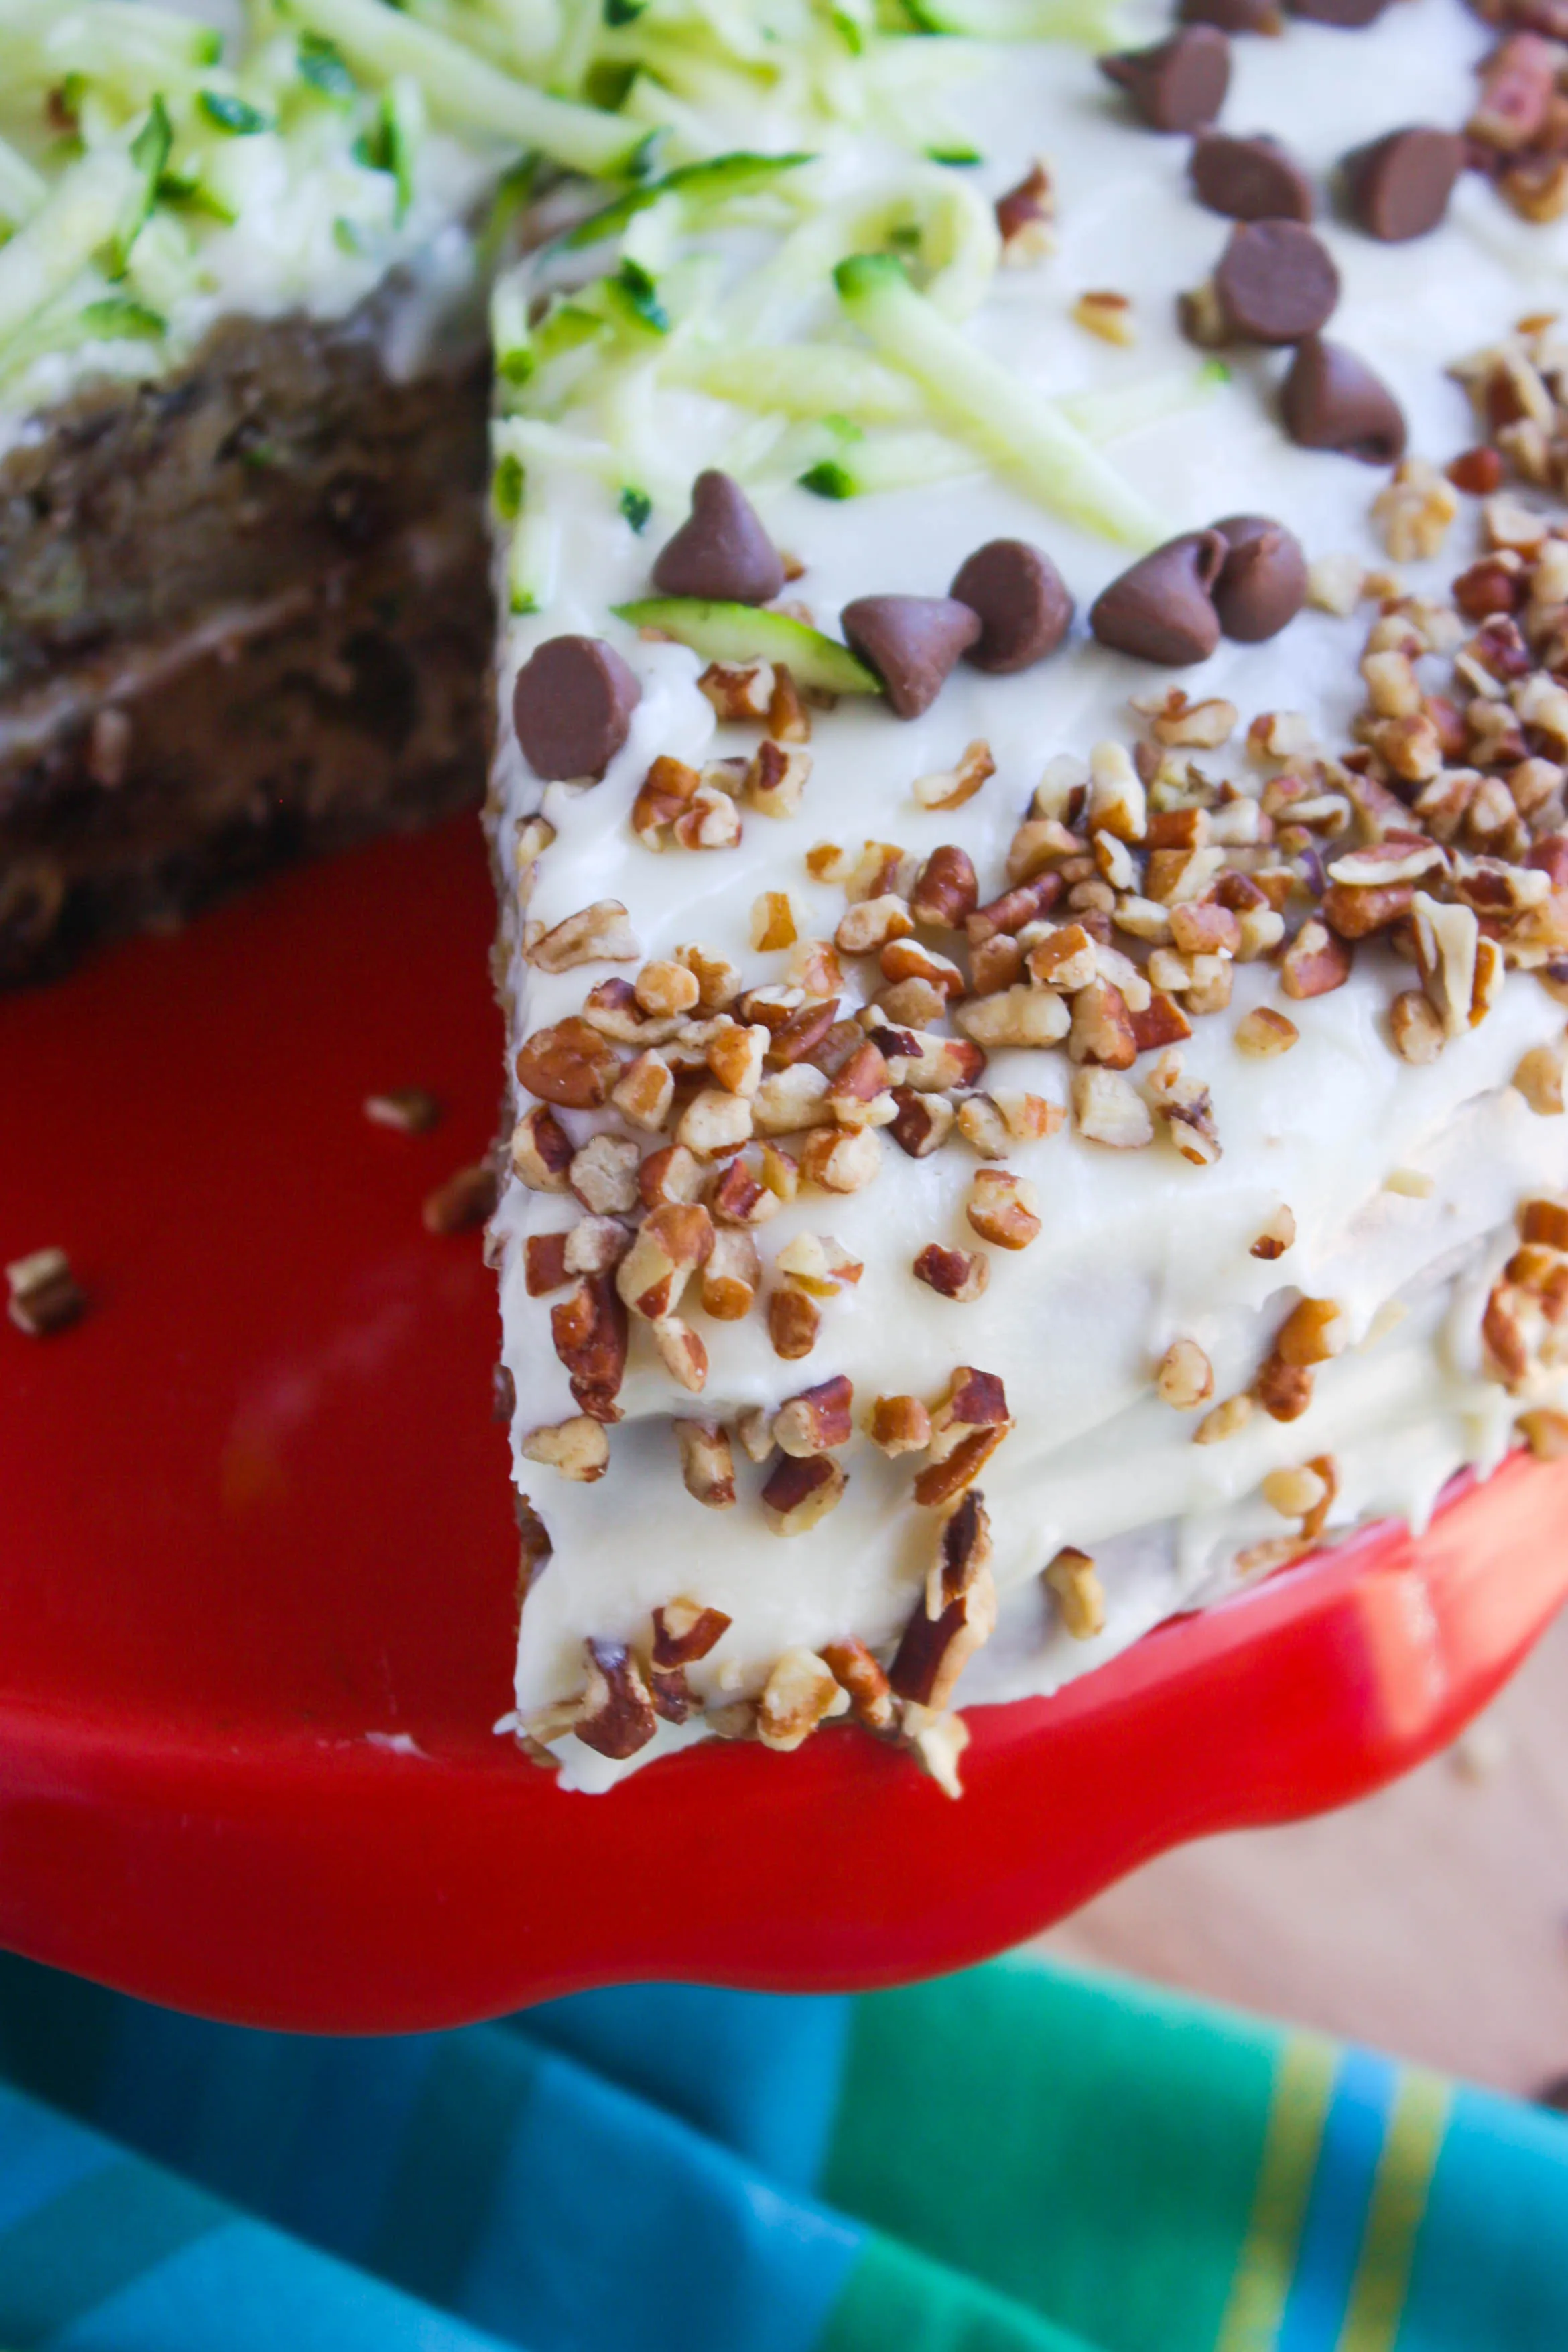 Zucchini-Banana Cake with Cream Cheese Frosting is a moist and delicious cake. Serve this dessert for a special occasion this summer!